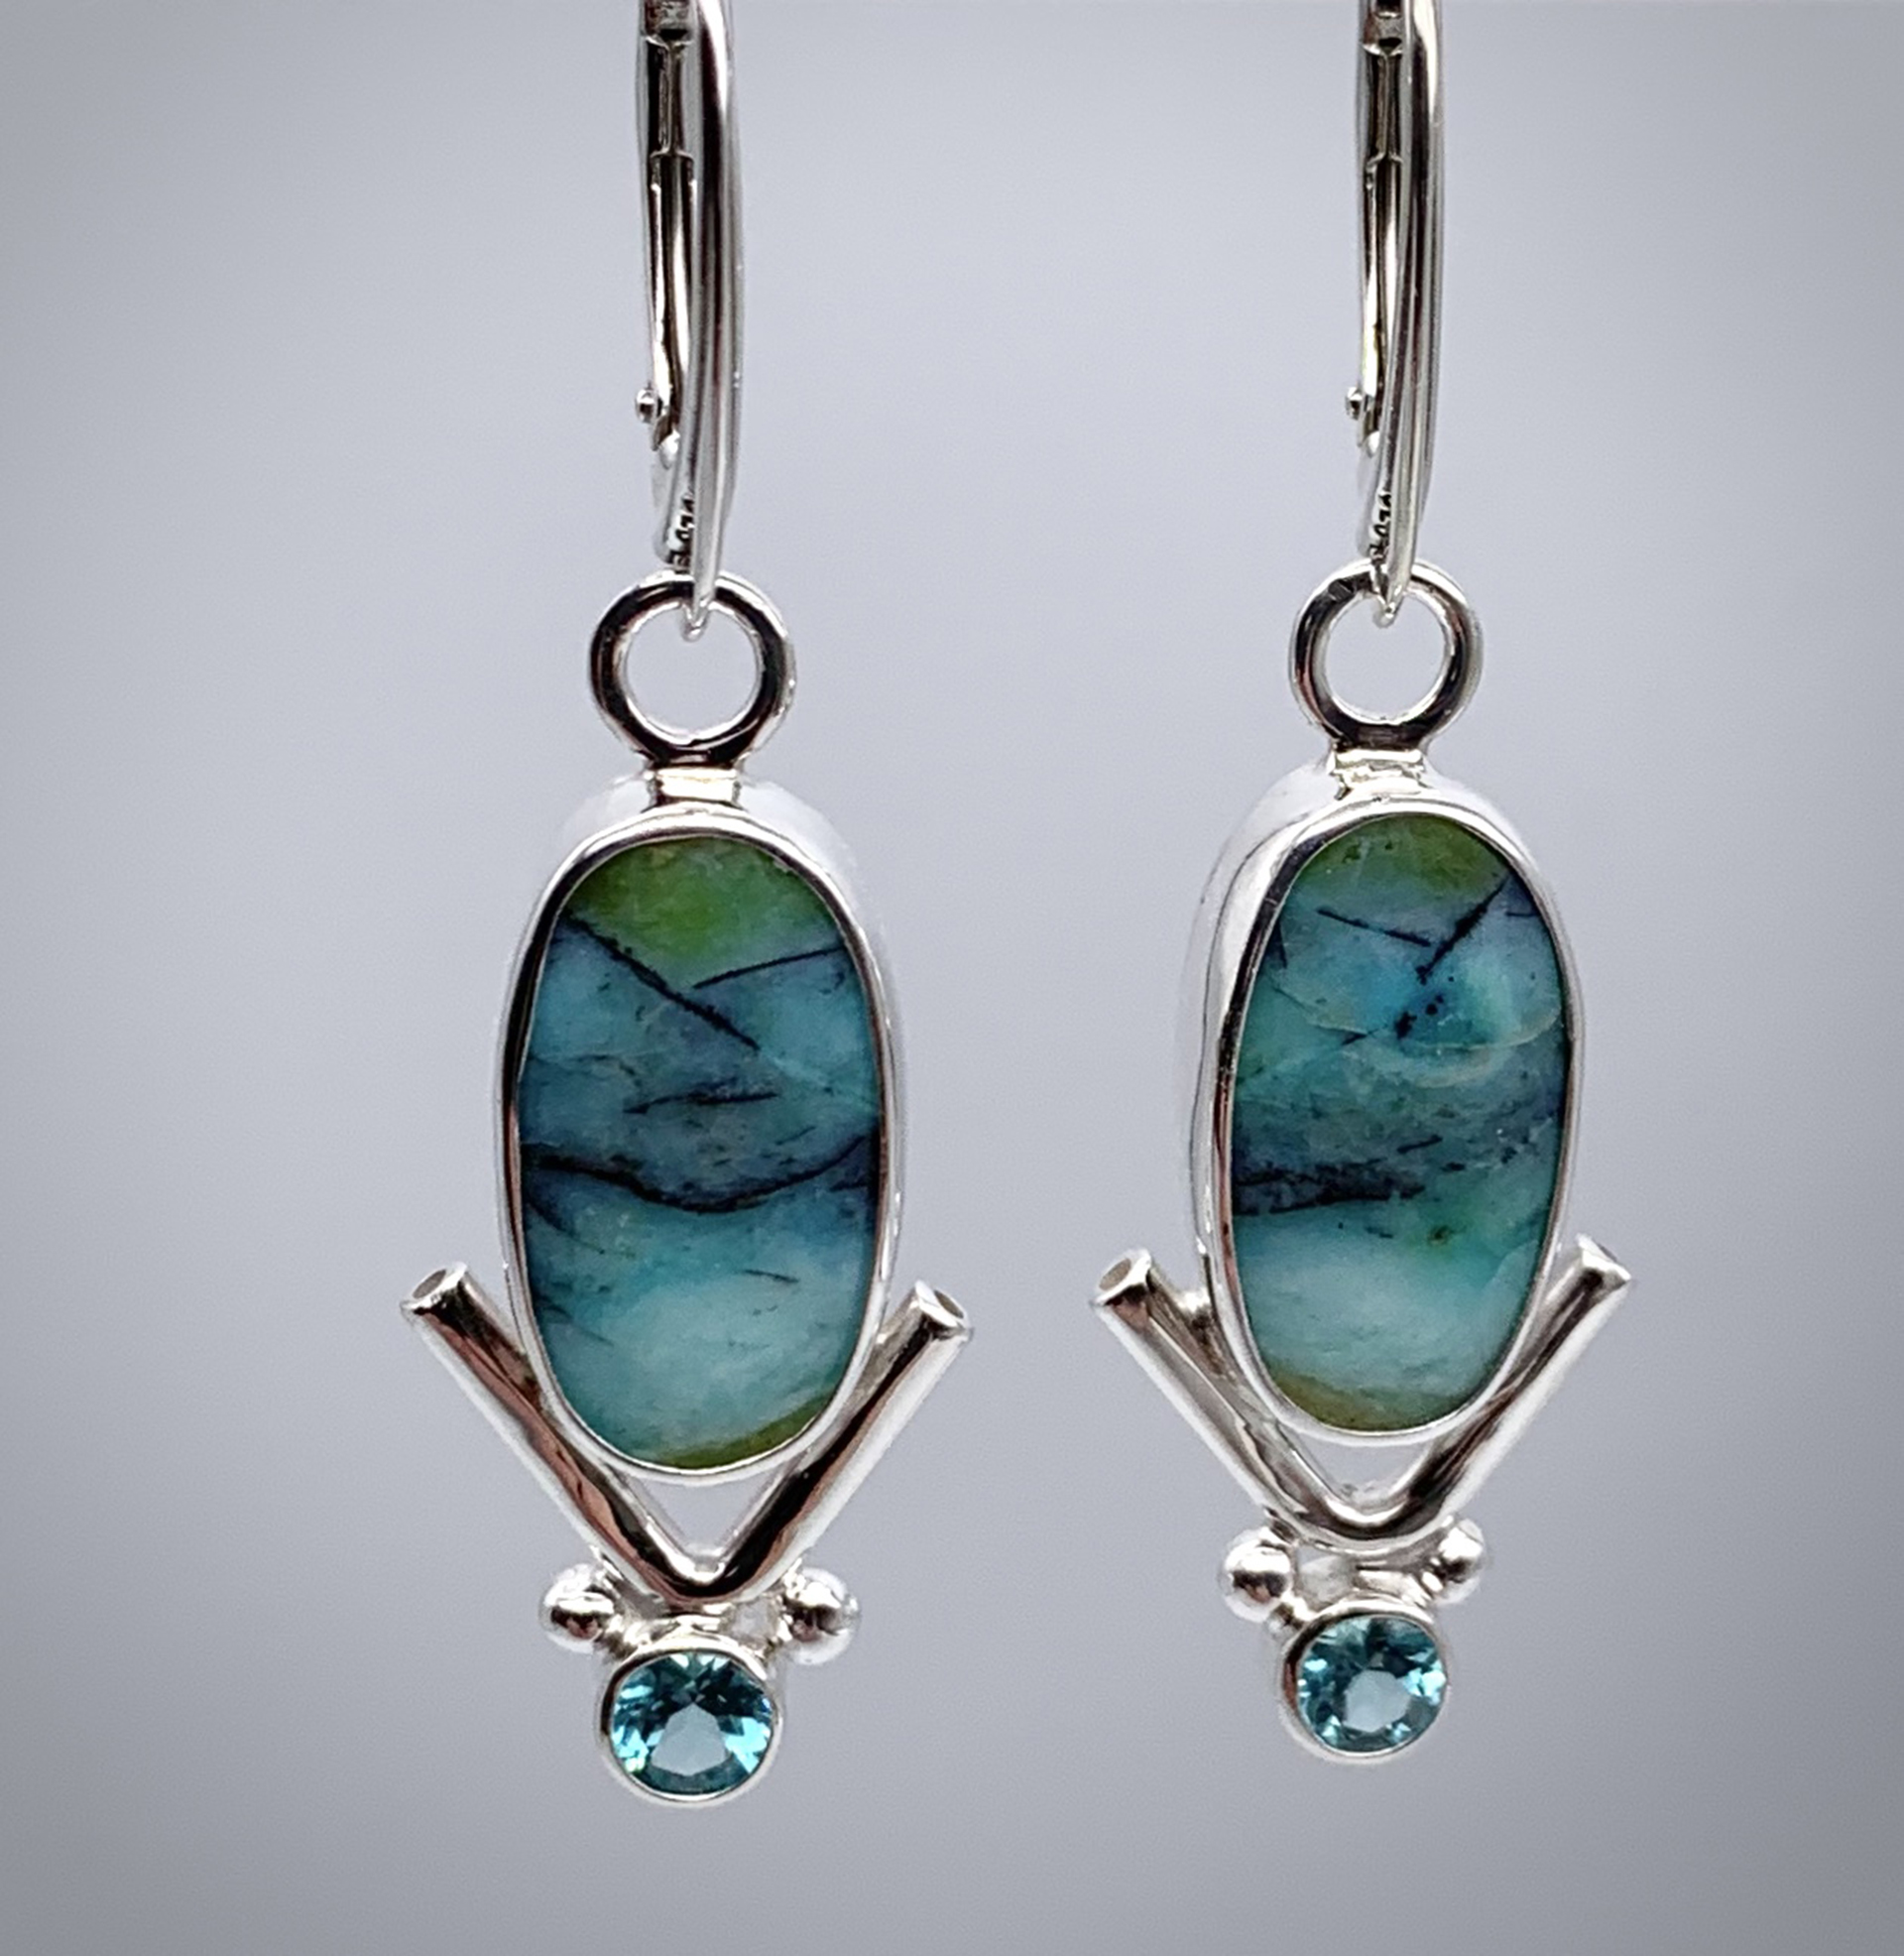 Fossil Opal Wood set in Silver with Apatite Accent Stones | Marilyn ...